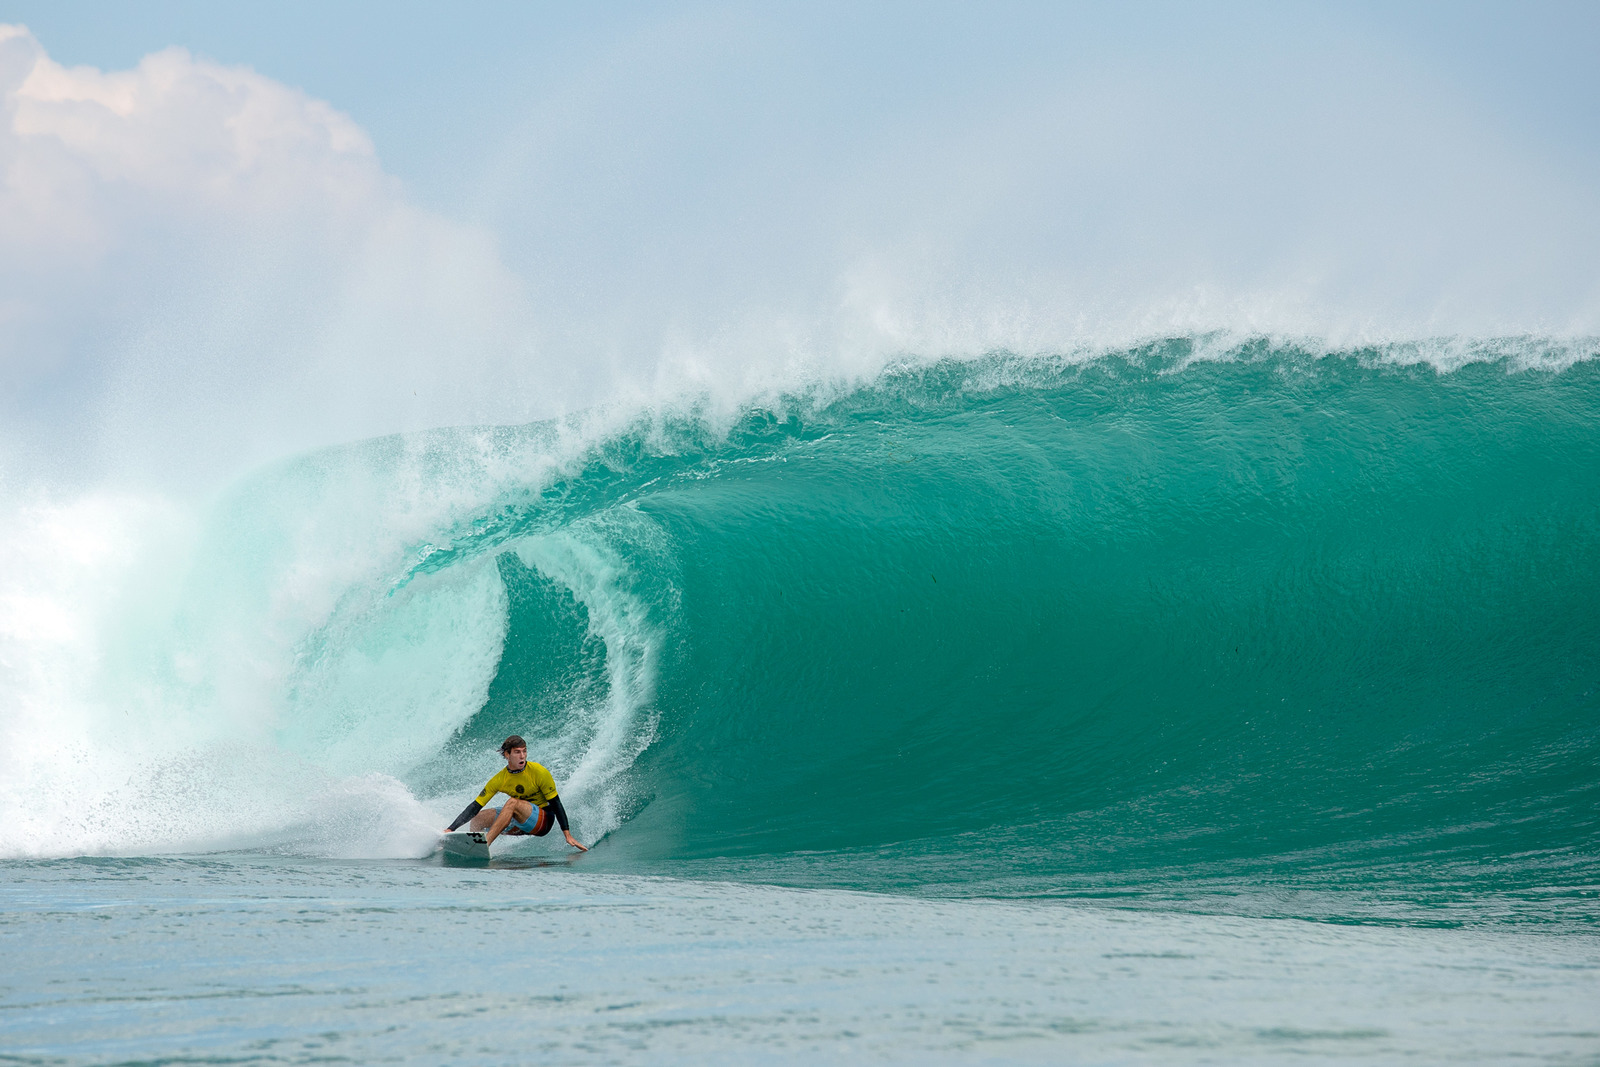 8 Bali  surfers  to compete against international surfers  in 